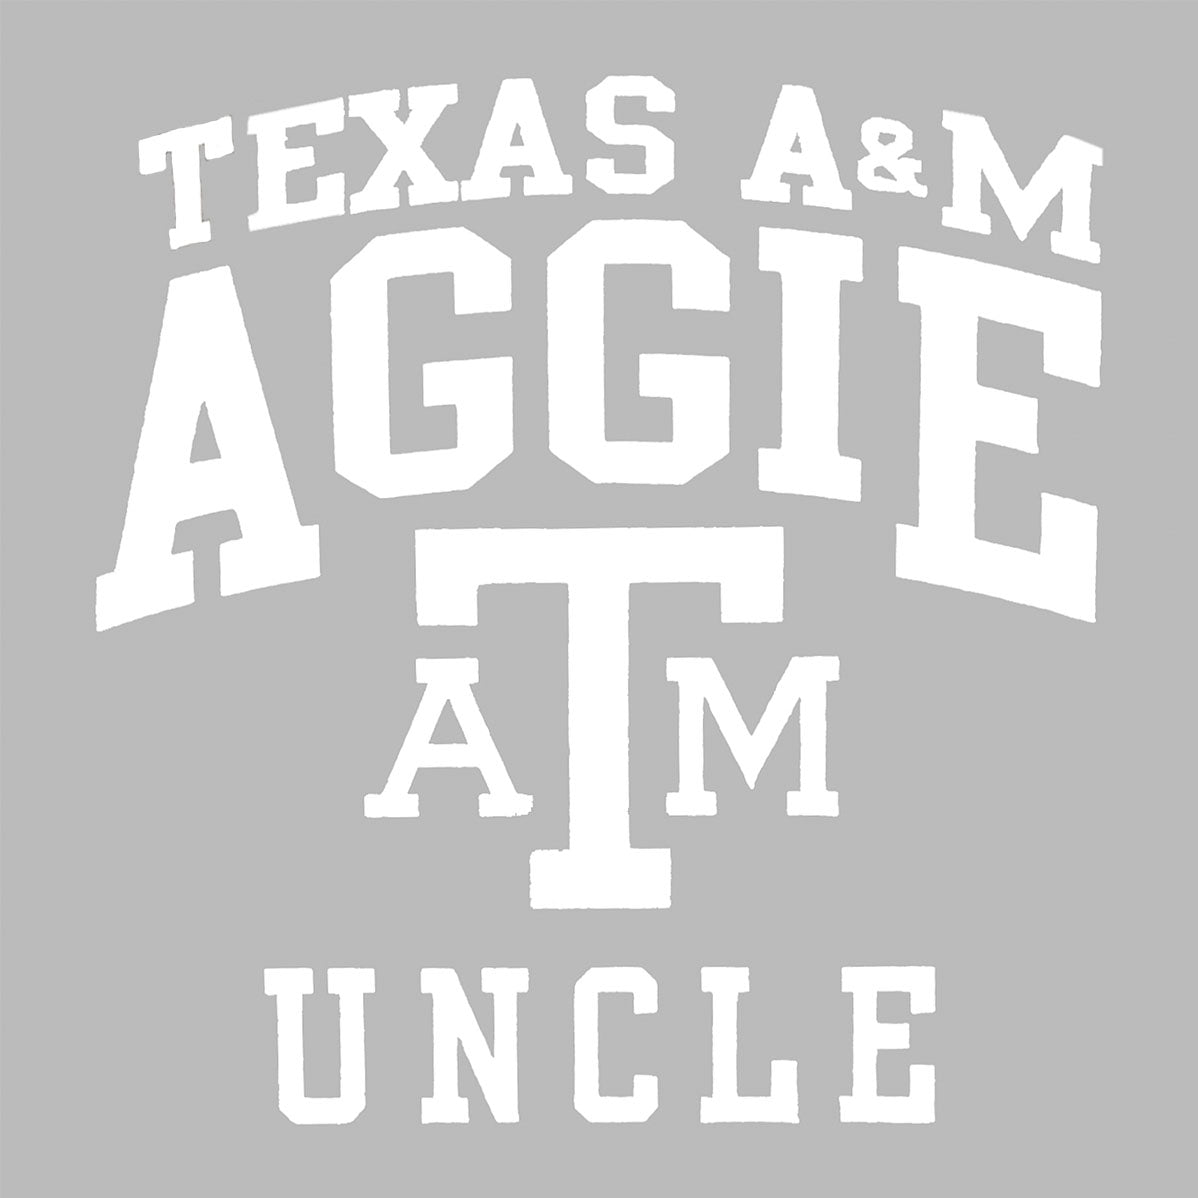 Texas A&M Aggie Uncle Decal